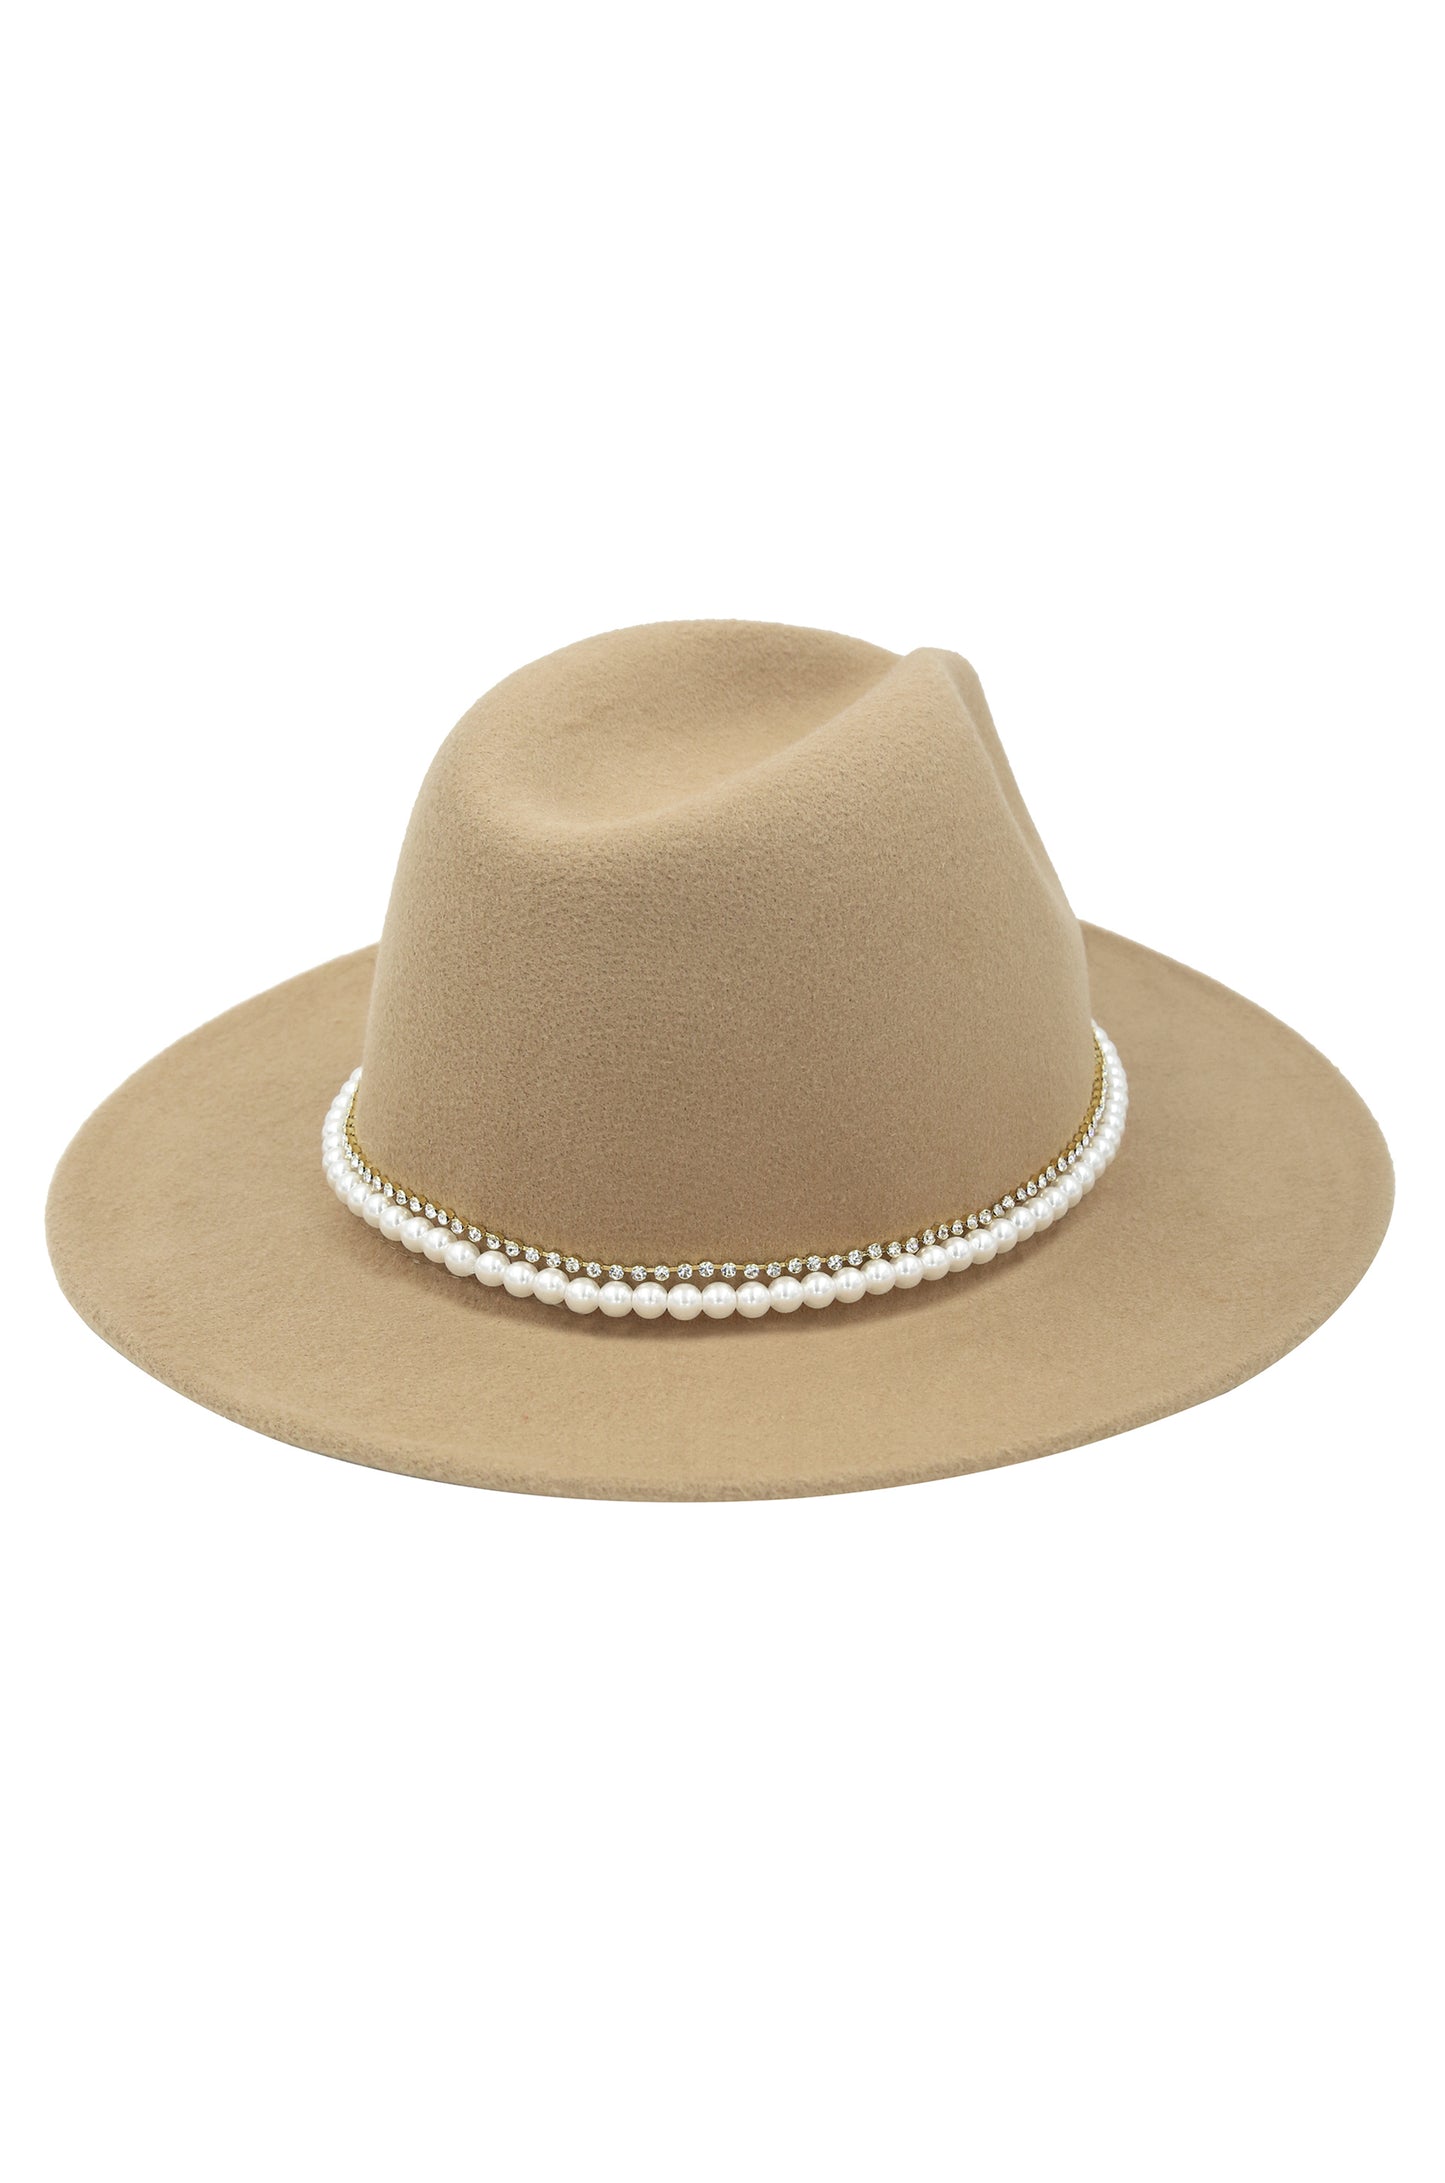 With the Band Hat in Tan with Pearls on white background  